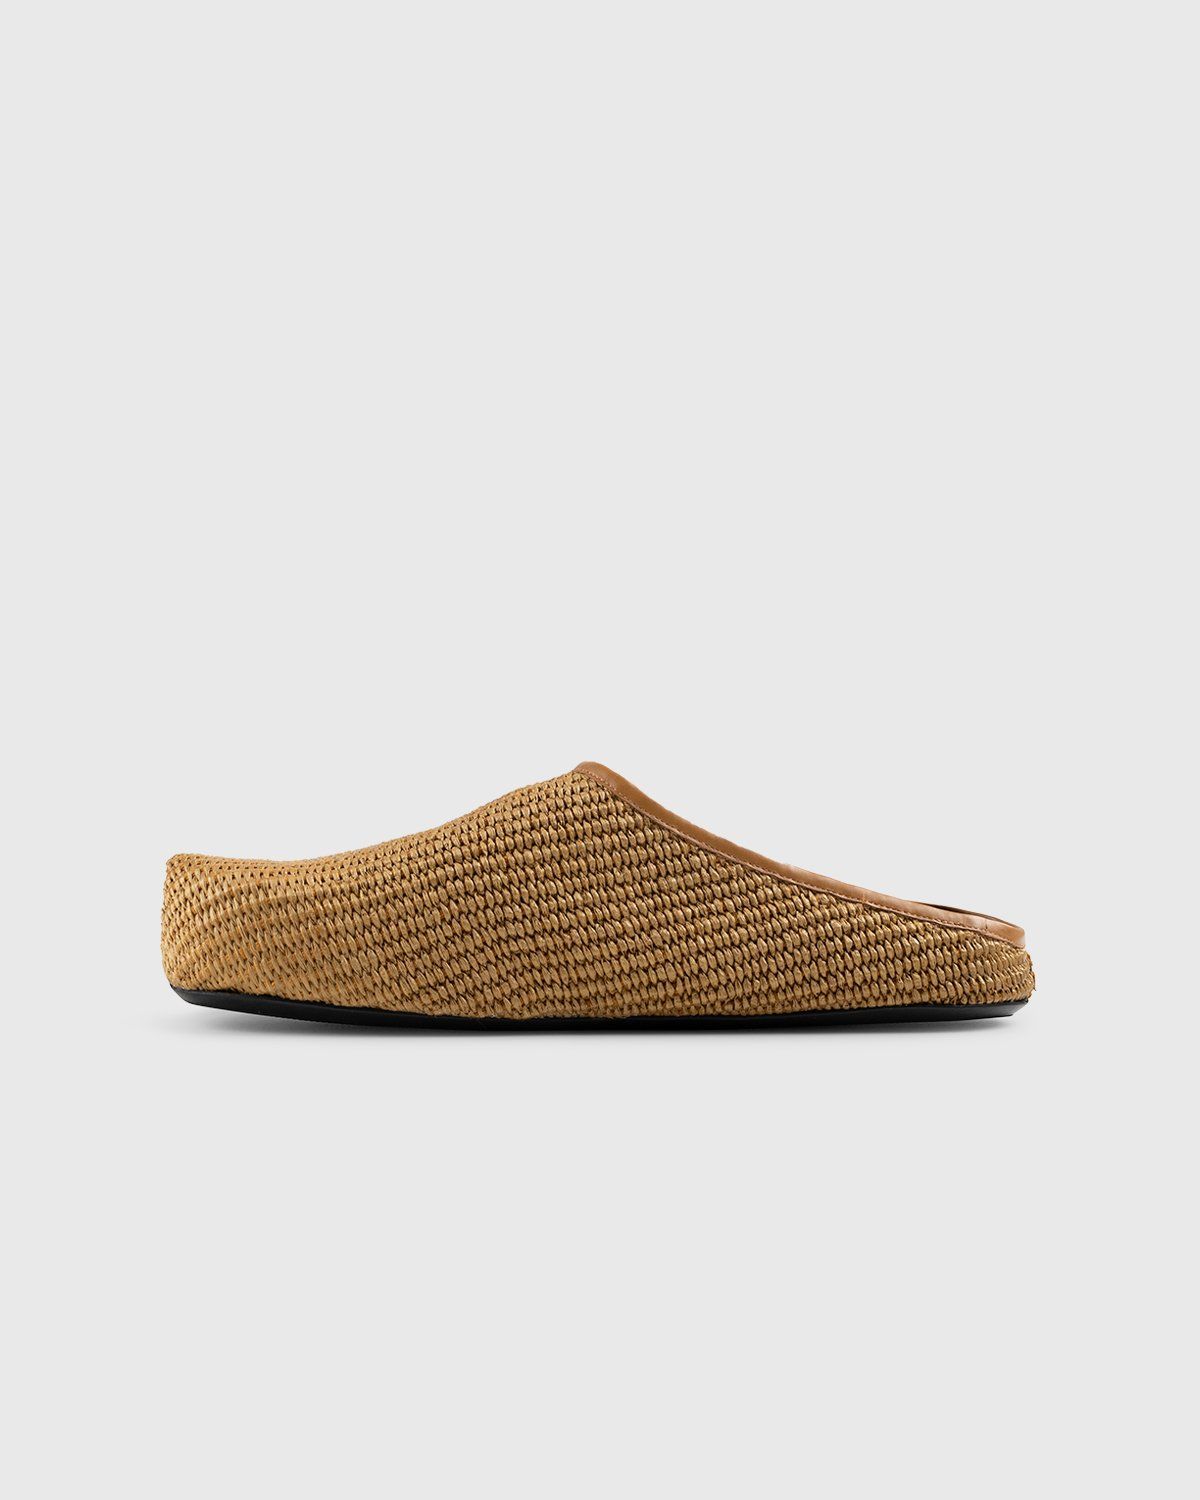 Marni – Woven Raffia and Leather Mules Brown/Black - Shoes - Brown - Image 2